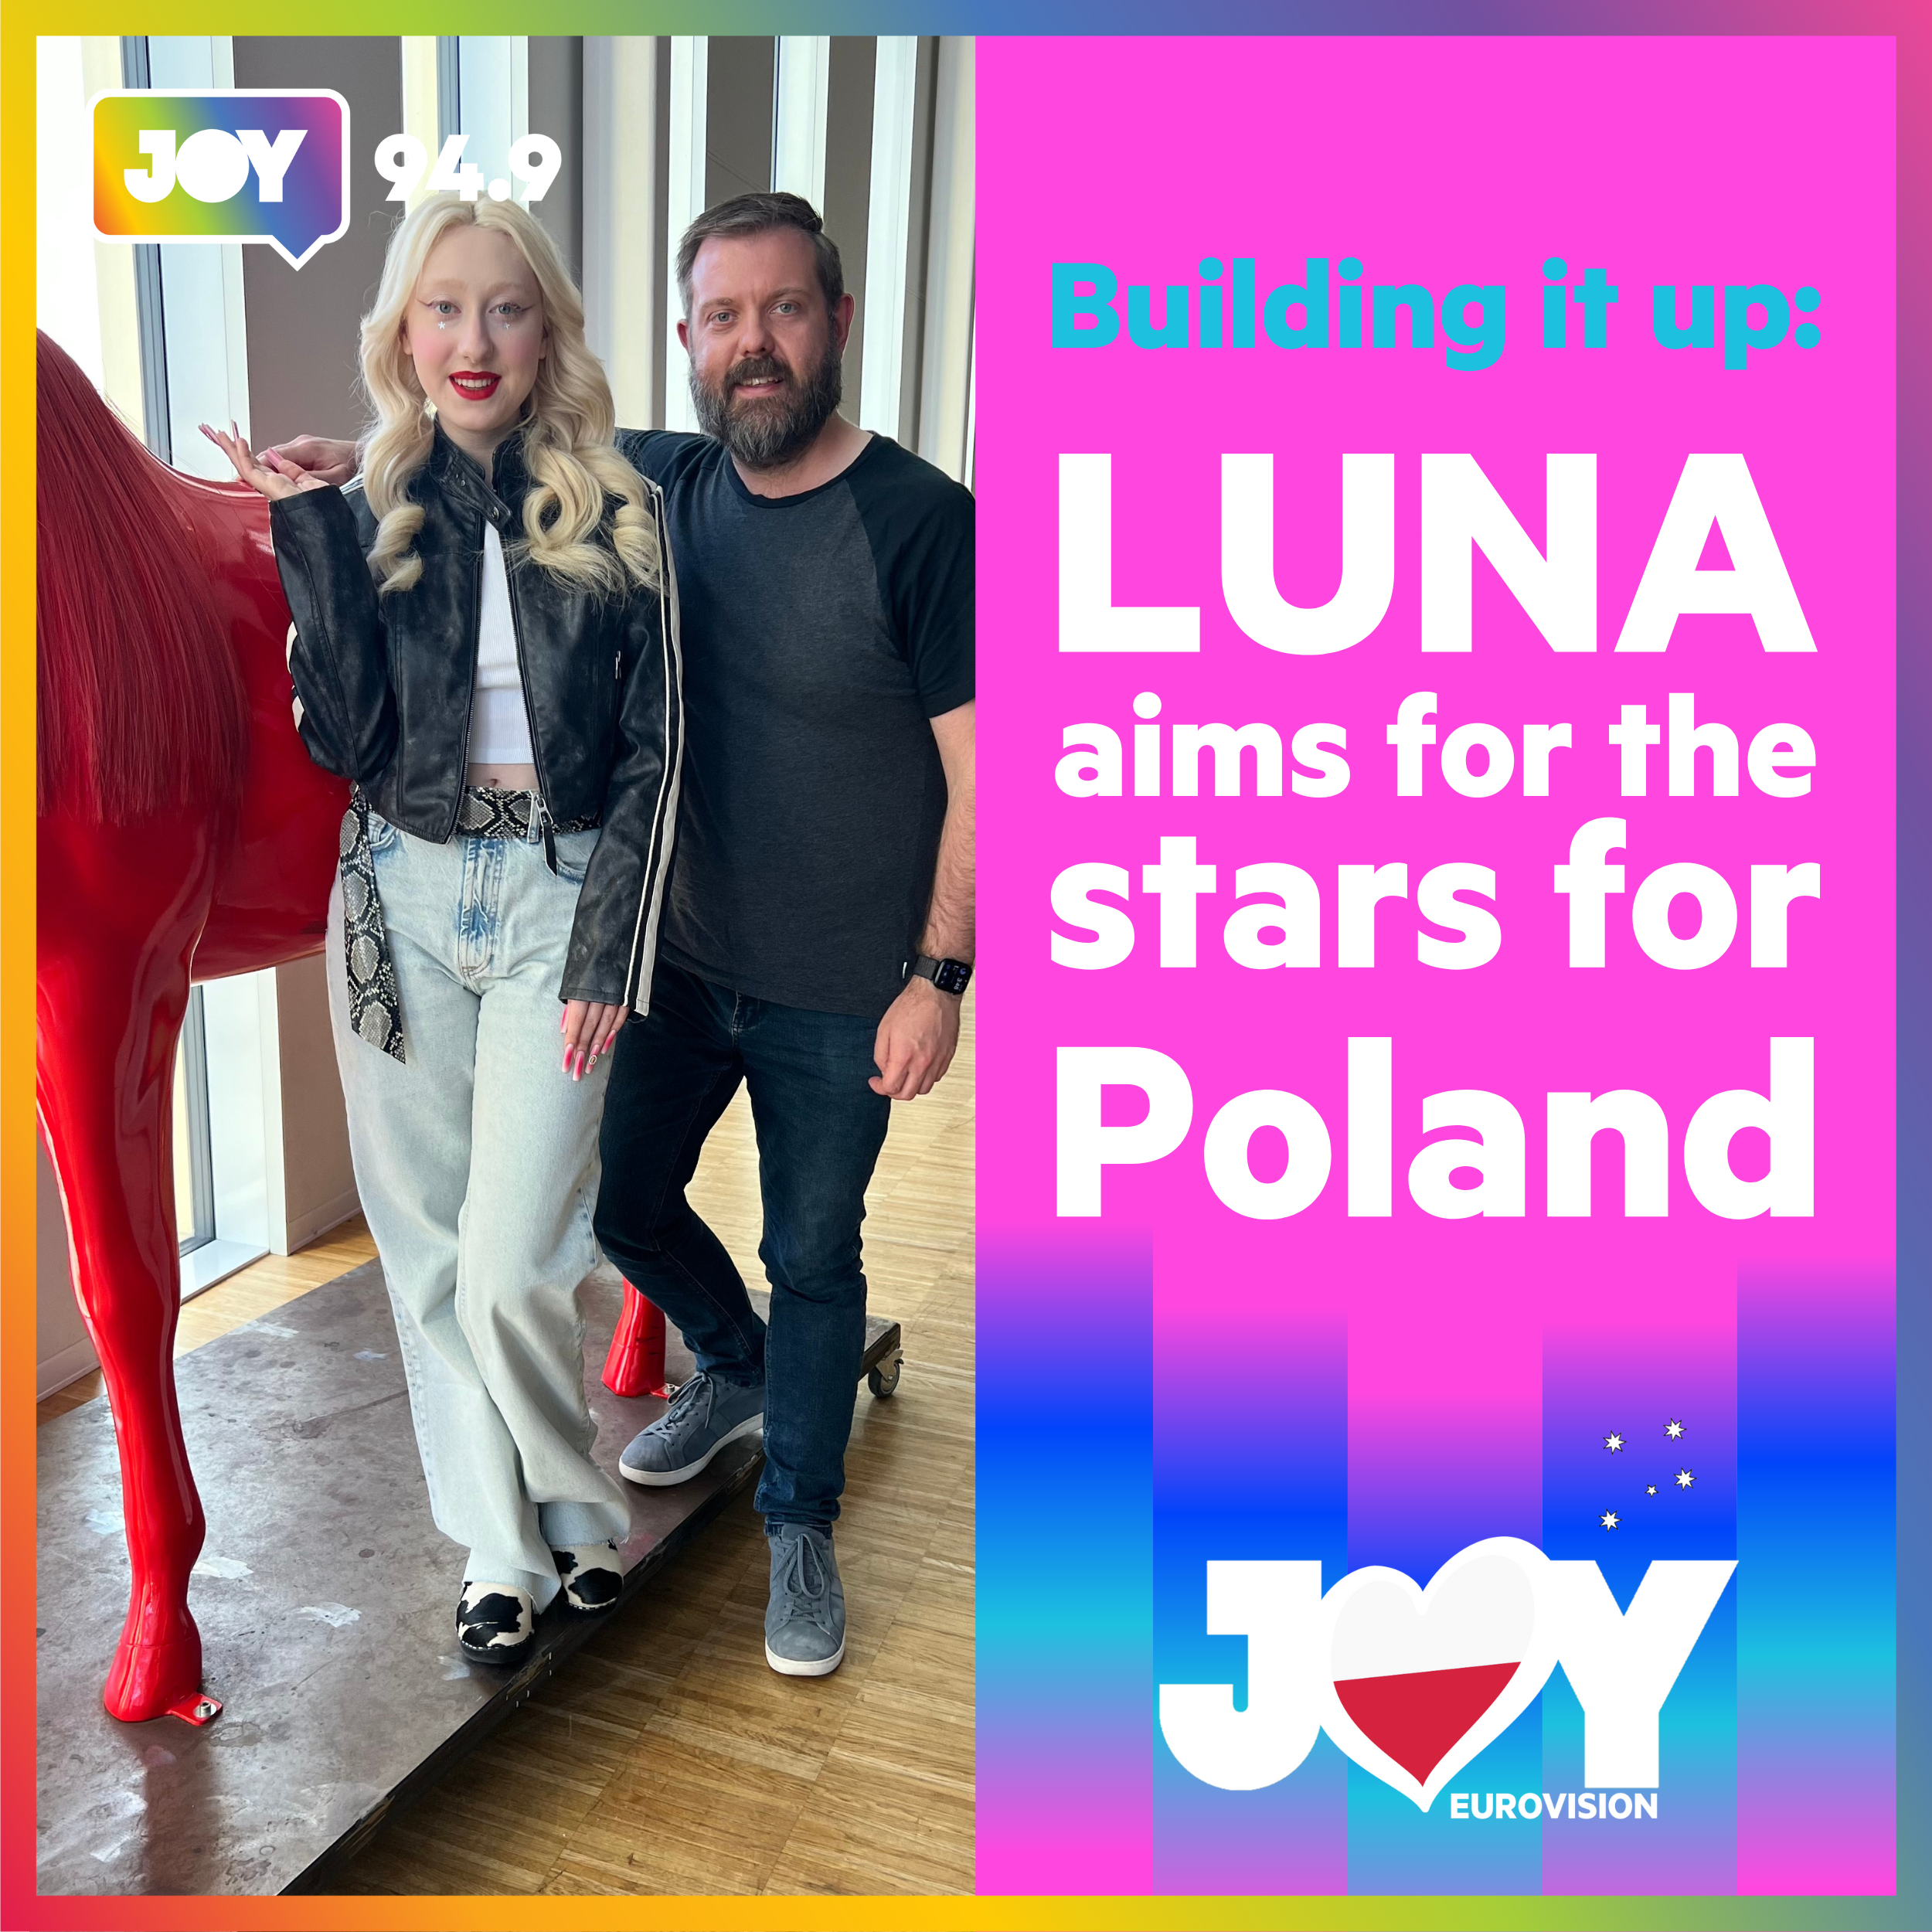 🇵🇱 Building it up: LUNA aims for the stars for Poland